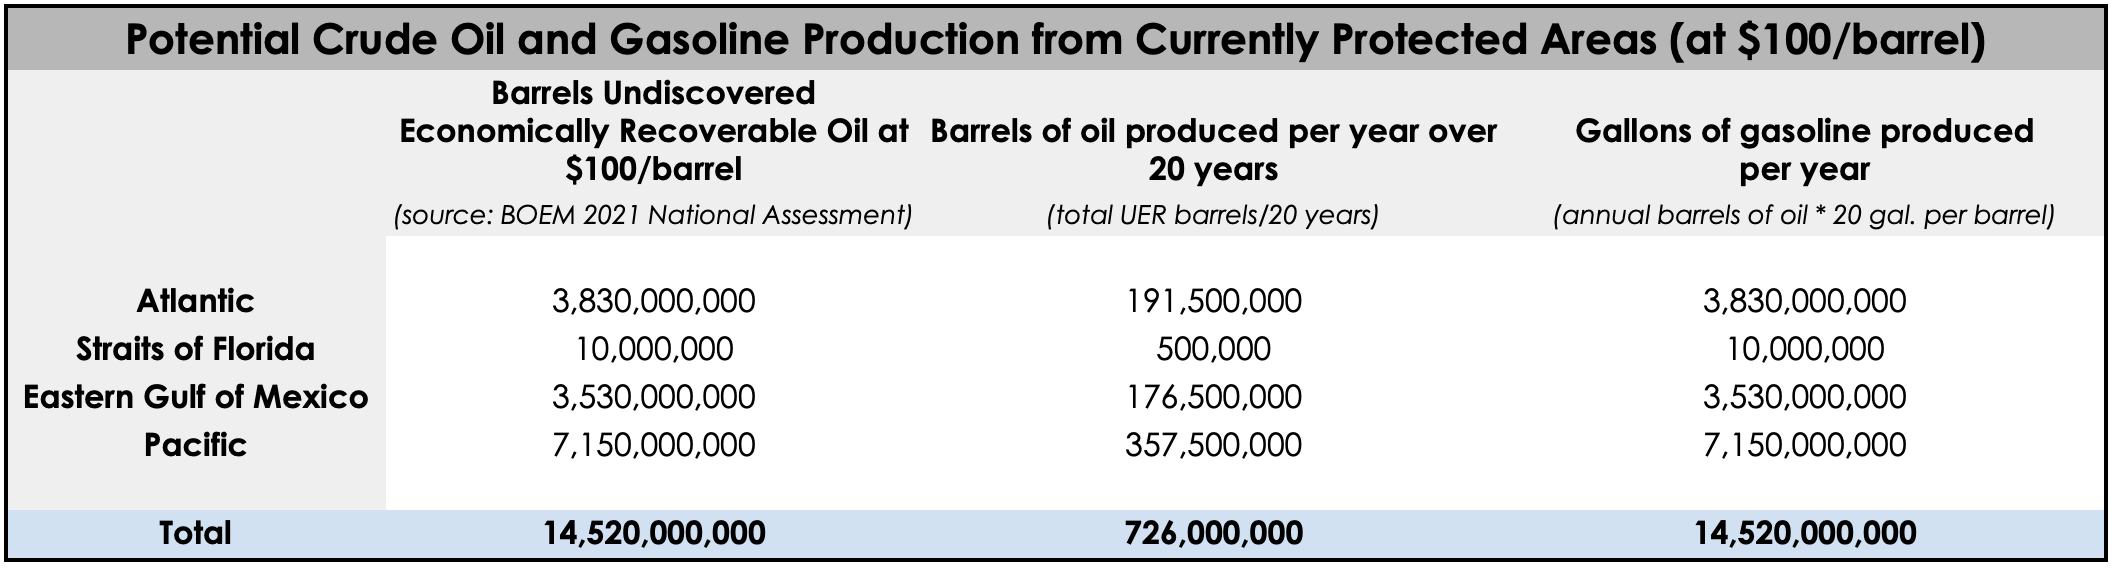 Table showing potential gasoline production from currently-protected offshore areas at $100 per barrel.